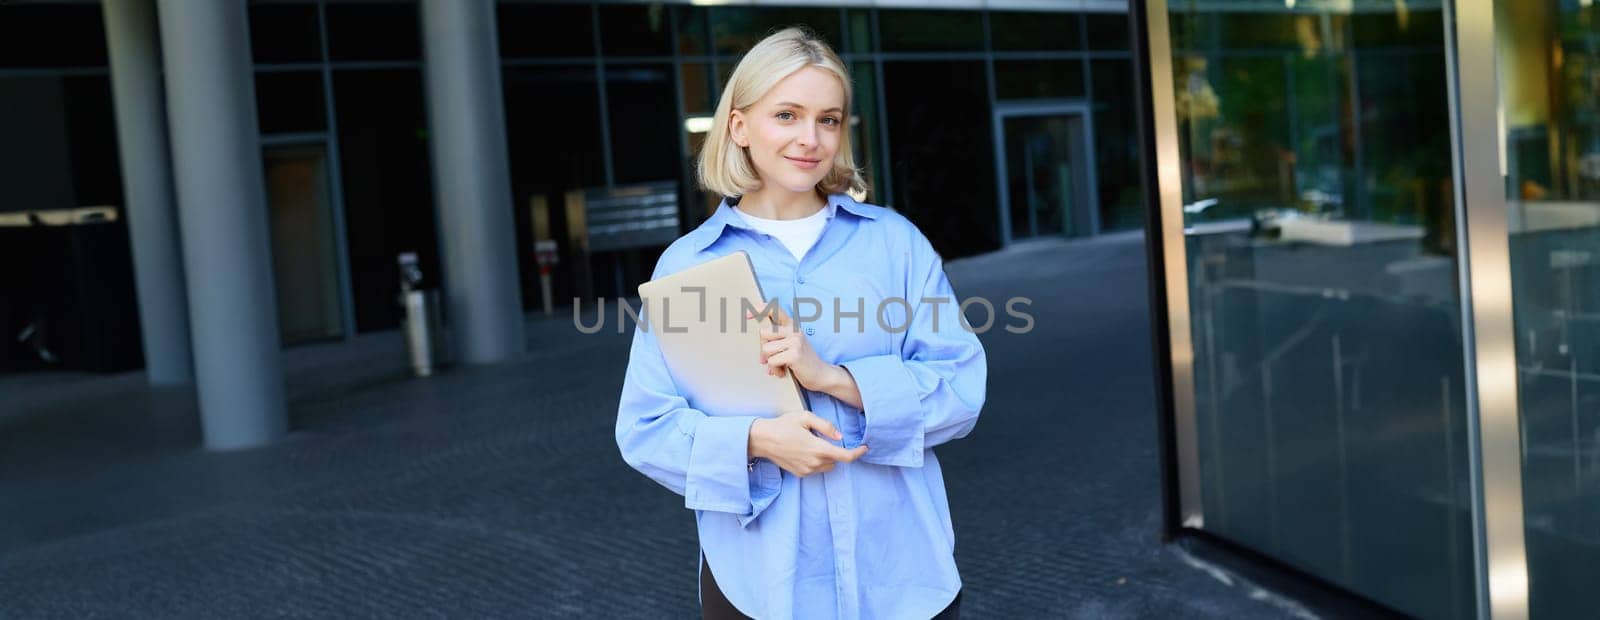 Stylish, modern young woman, student standing on street in campus, heading to lecture with notebook and study material, smiling at camera.